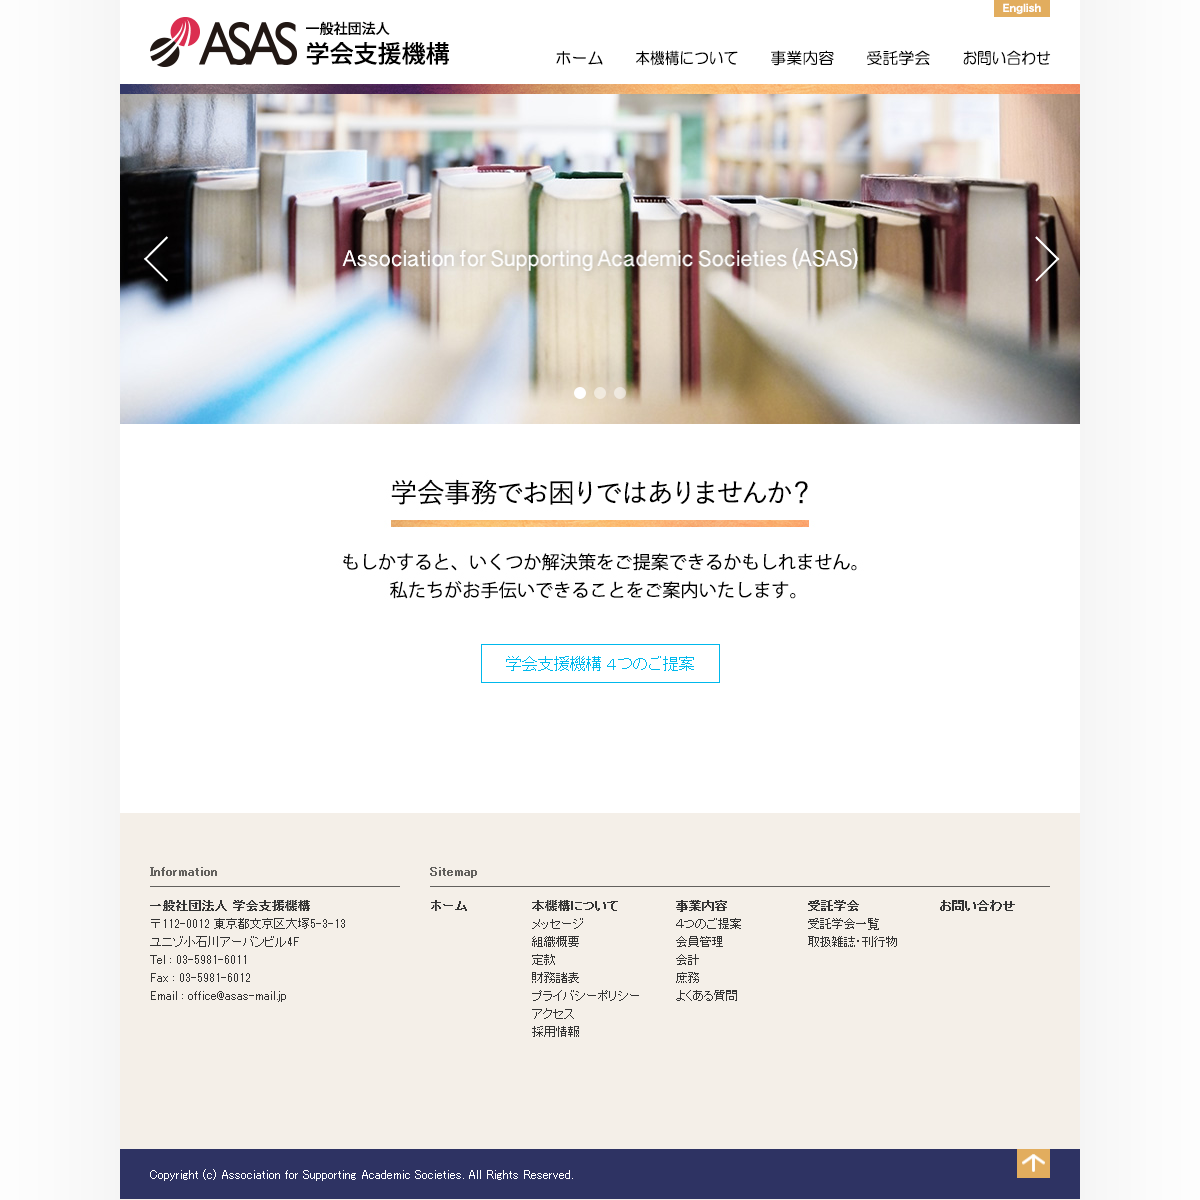 A complete backup of asas.or.jp